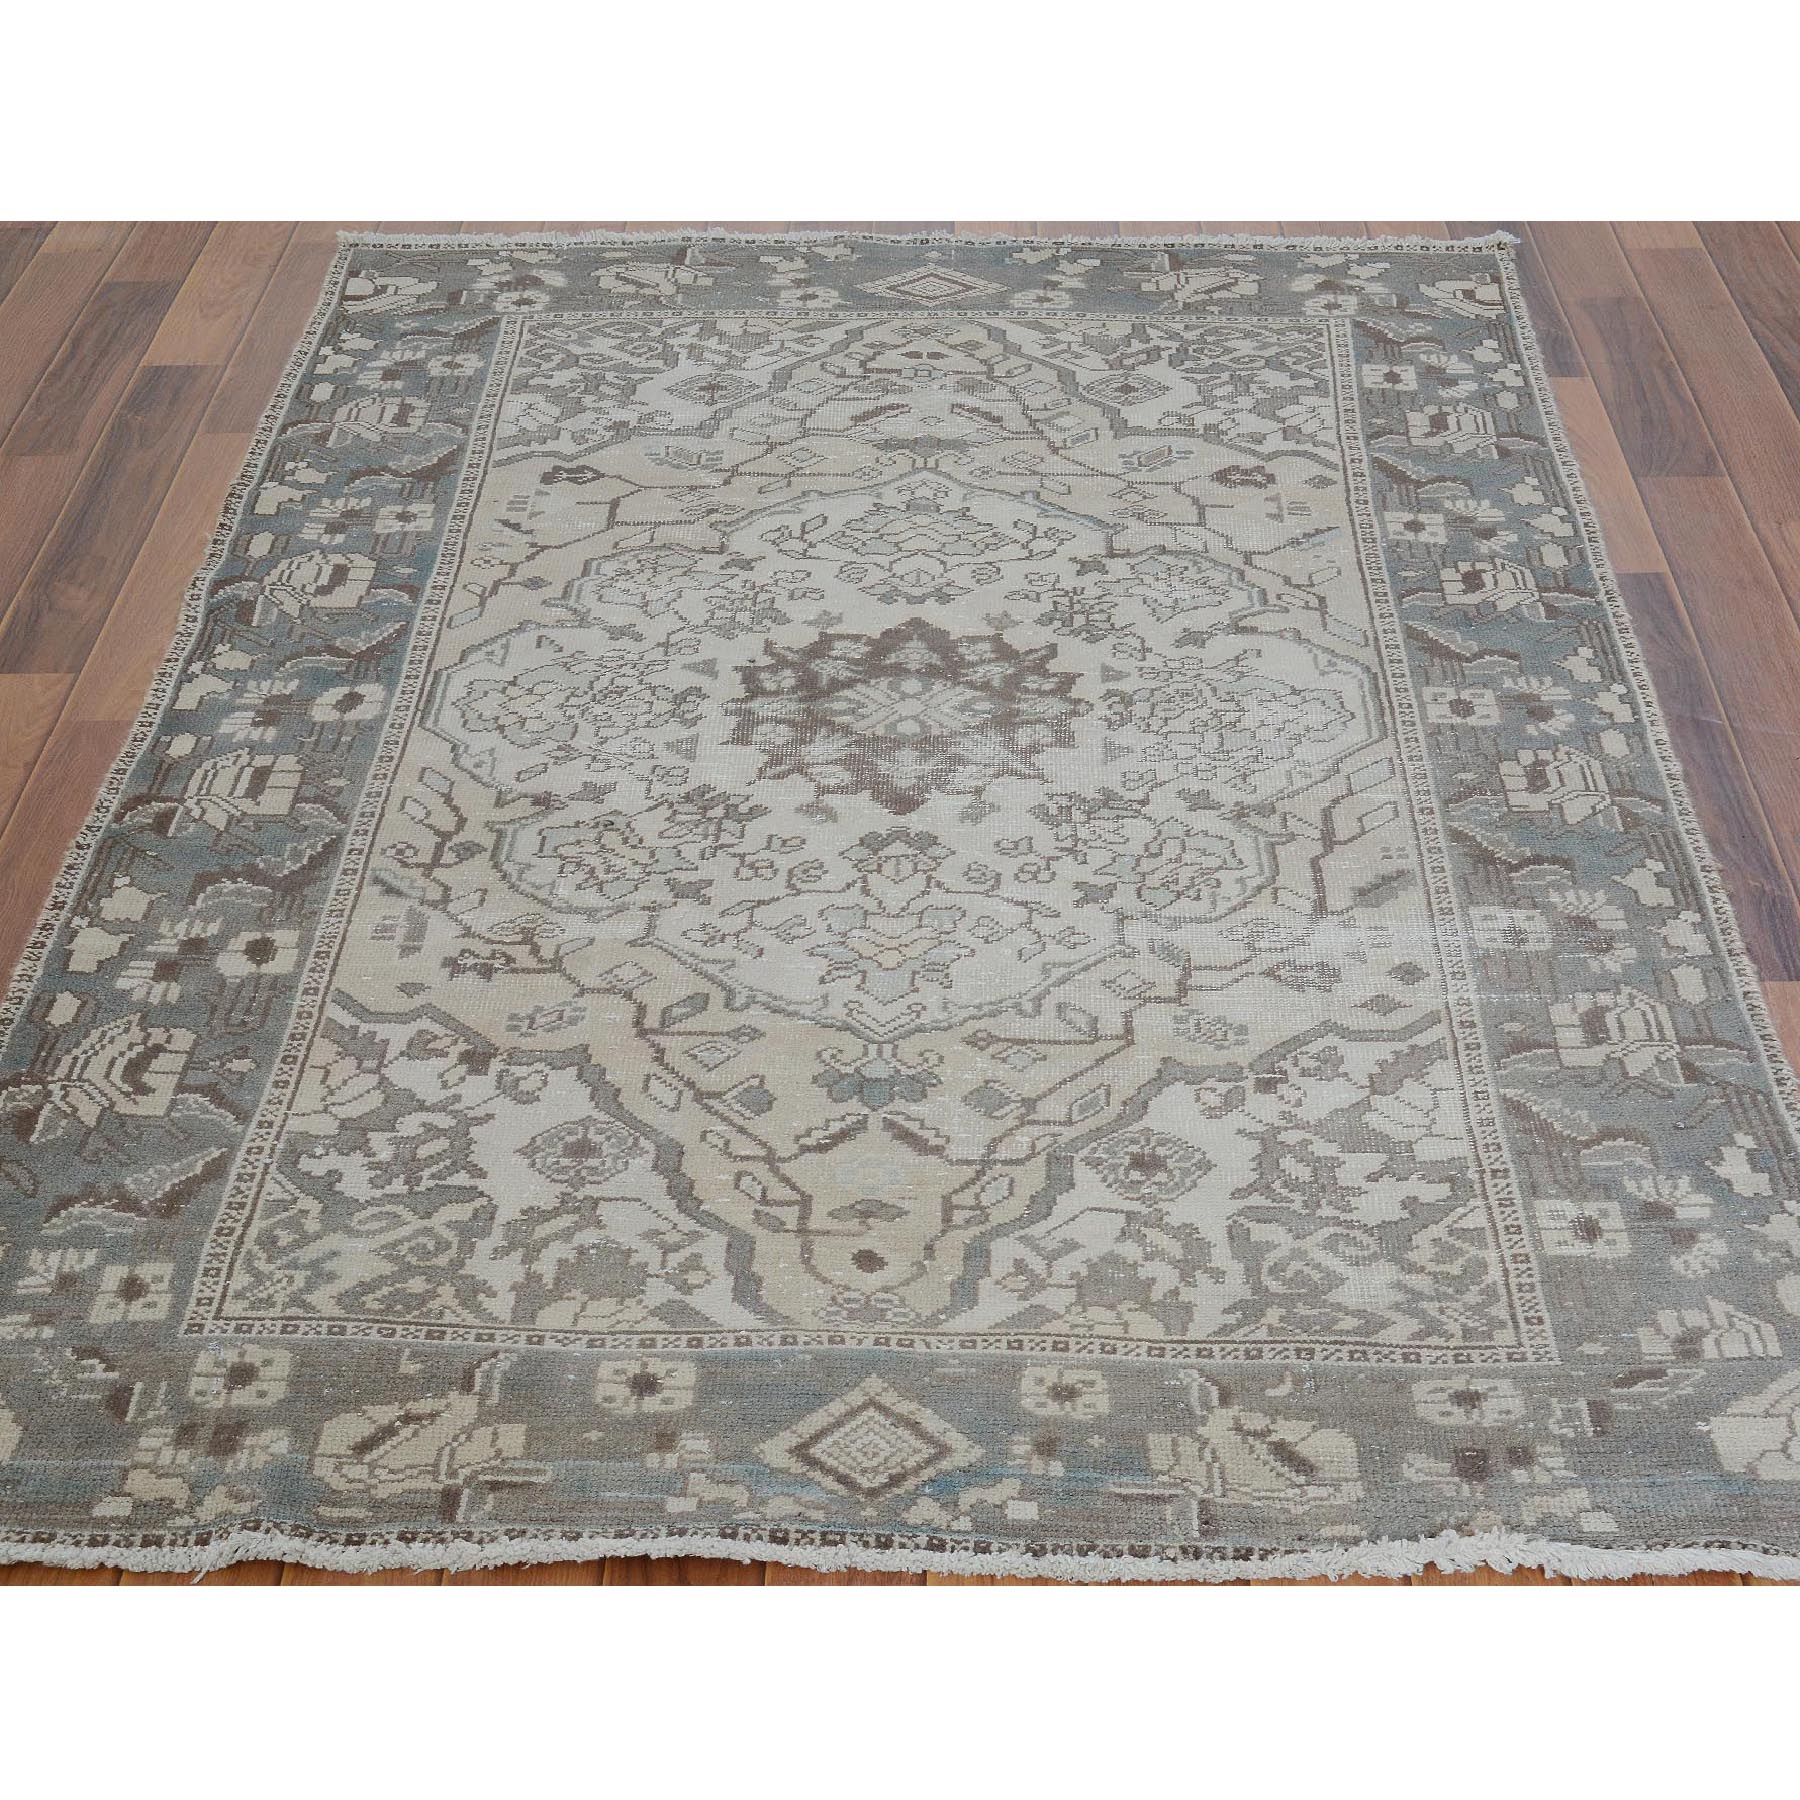 4-2 x6-8  Vintage And Worn Down Persian Bakhtiari Pure Wool Hand Knotted Oriental Rug 